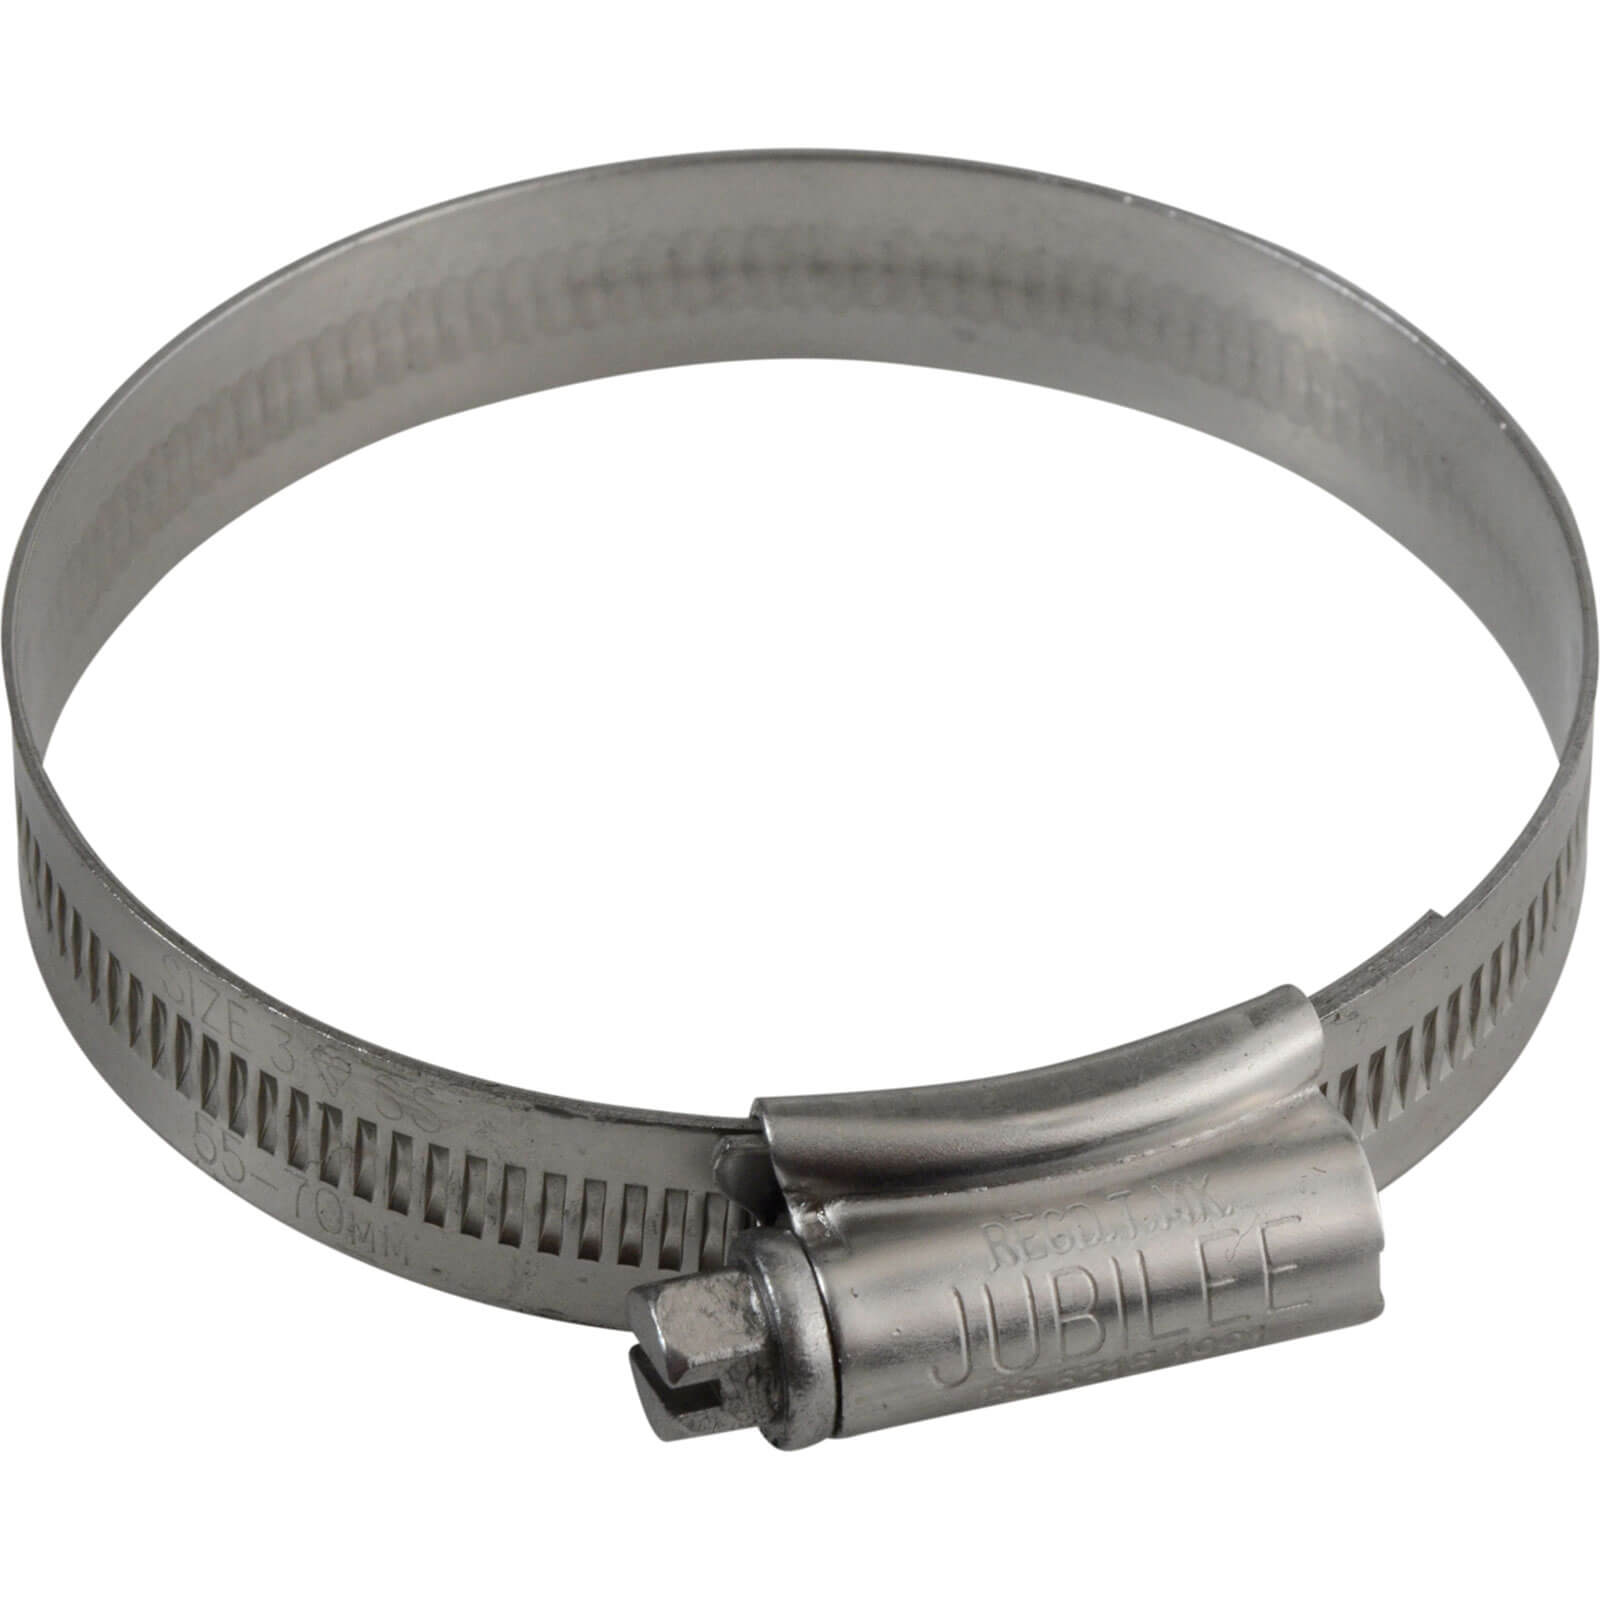 Image of Jubilee Stainless Steel Hose Clip 55mm - 70mm Pack of 1